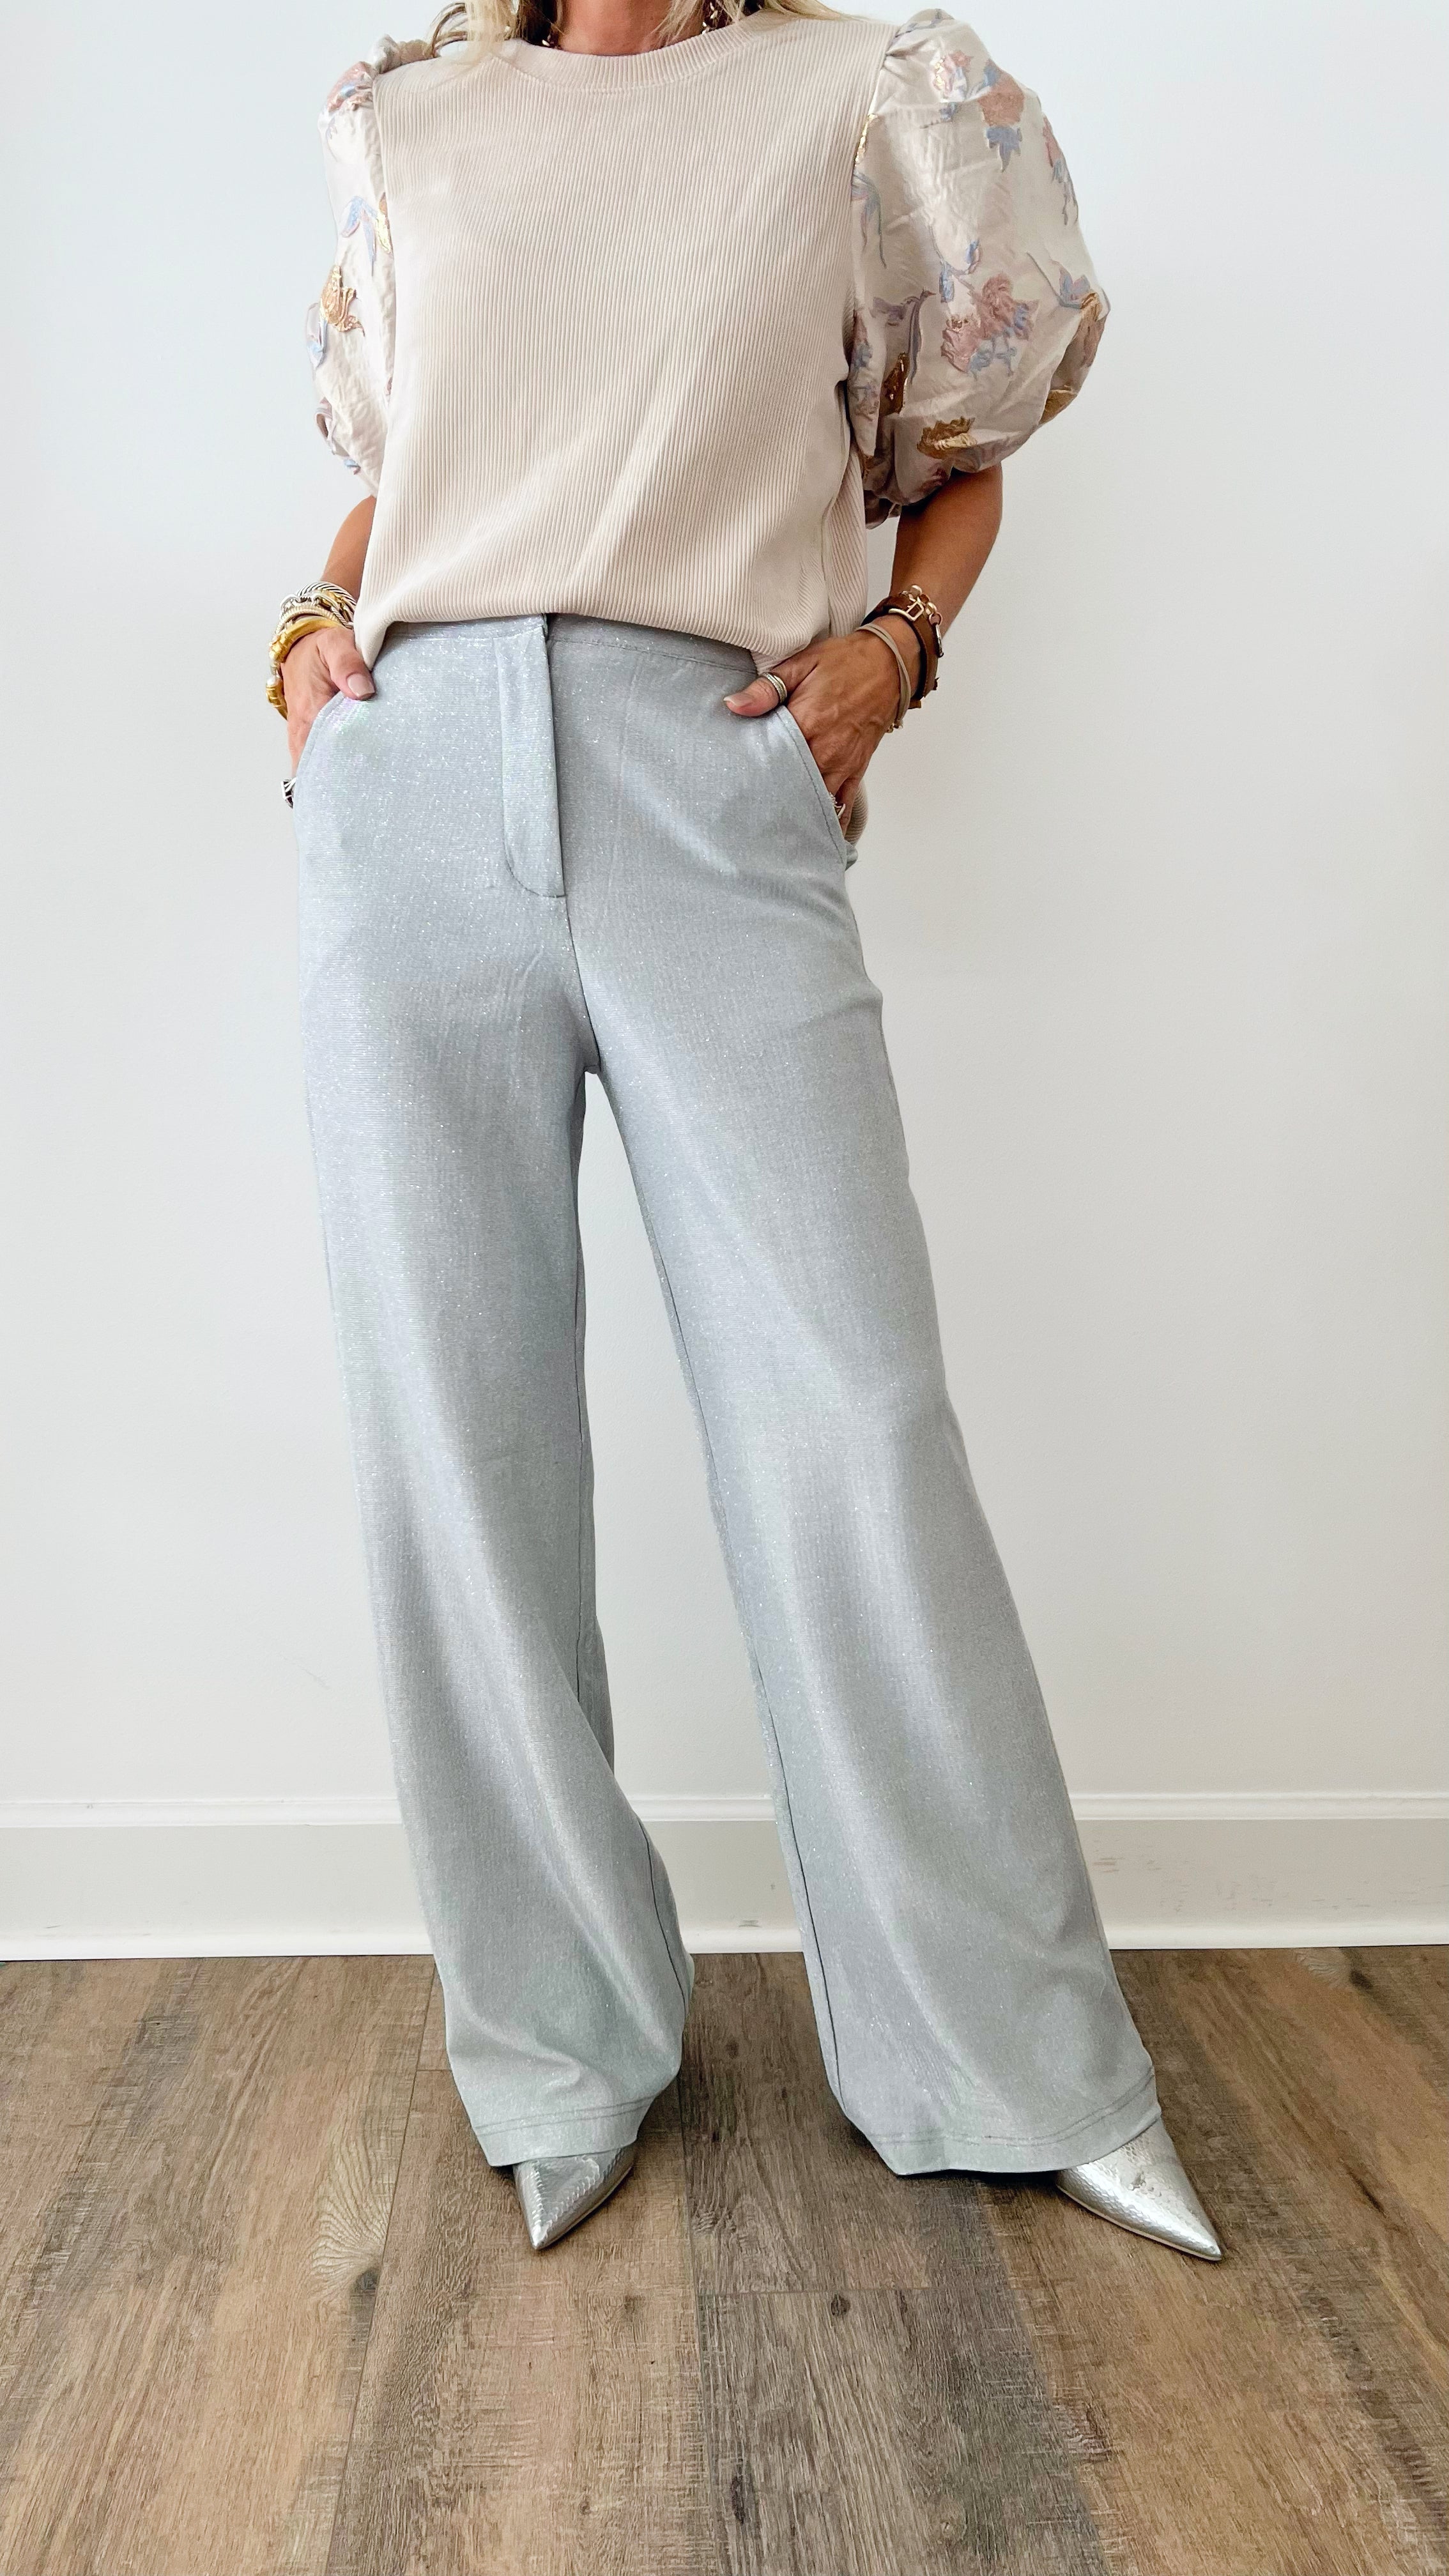 DPTO — No.205 Heather Grey Yak Blend Trousers